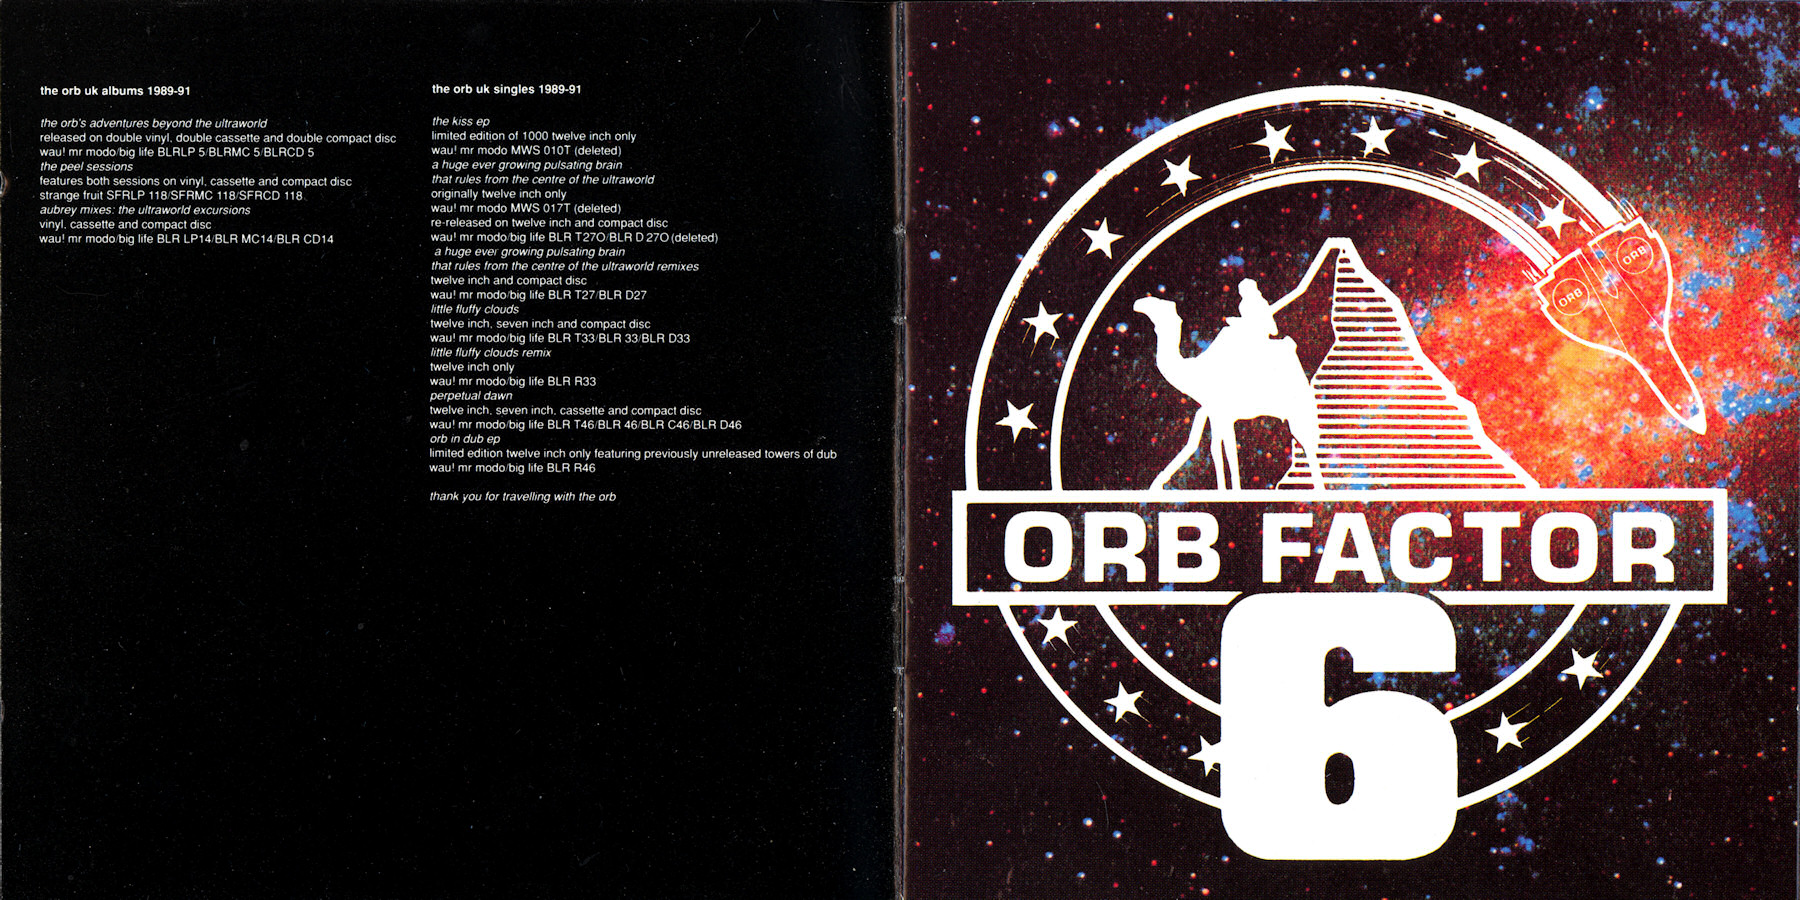 Do life big. The Orb 1991. The Orb's Adventures Beyond the Ultraworld the Orb. The Orb - little fluffy clouds.